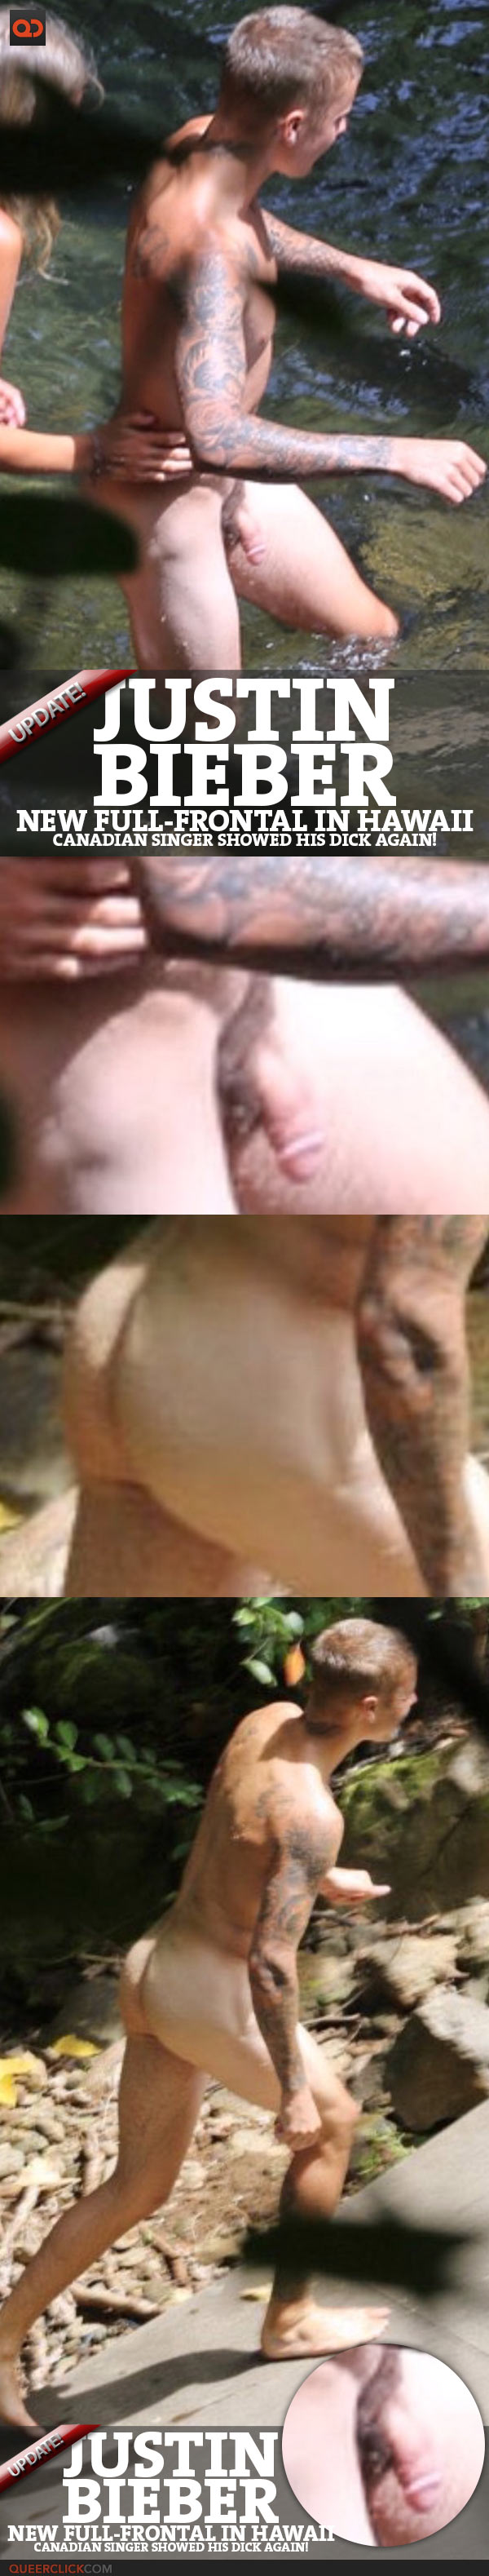 Justin Bieber New Full-Frontal In Hawaii - The Canadian Singer Showed His Dick Again, UNCENSORED PHOTO!